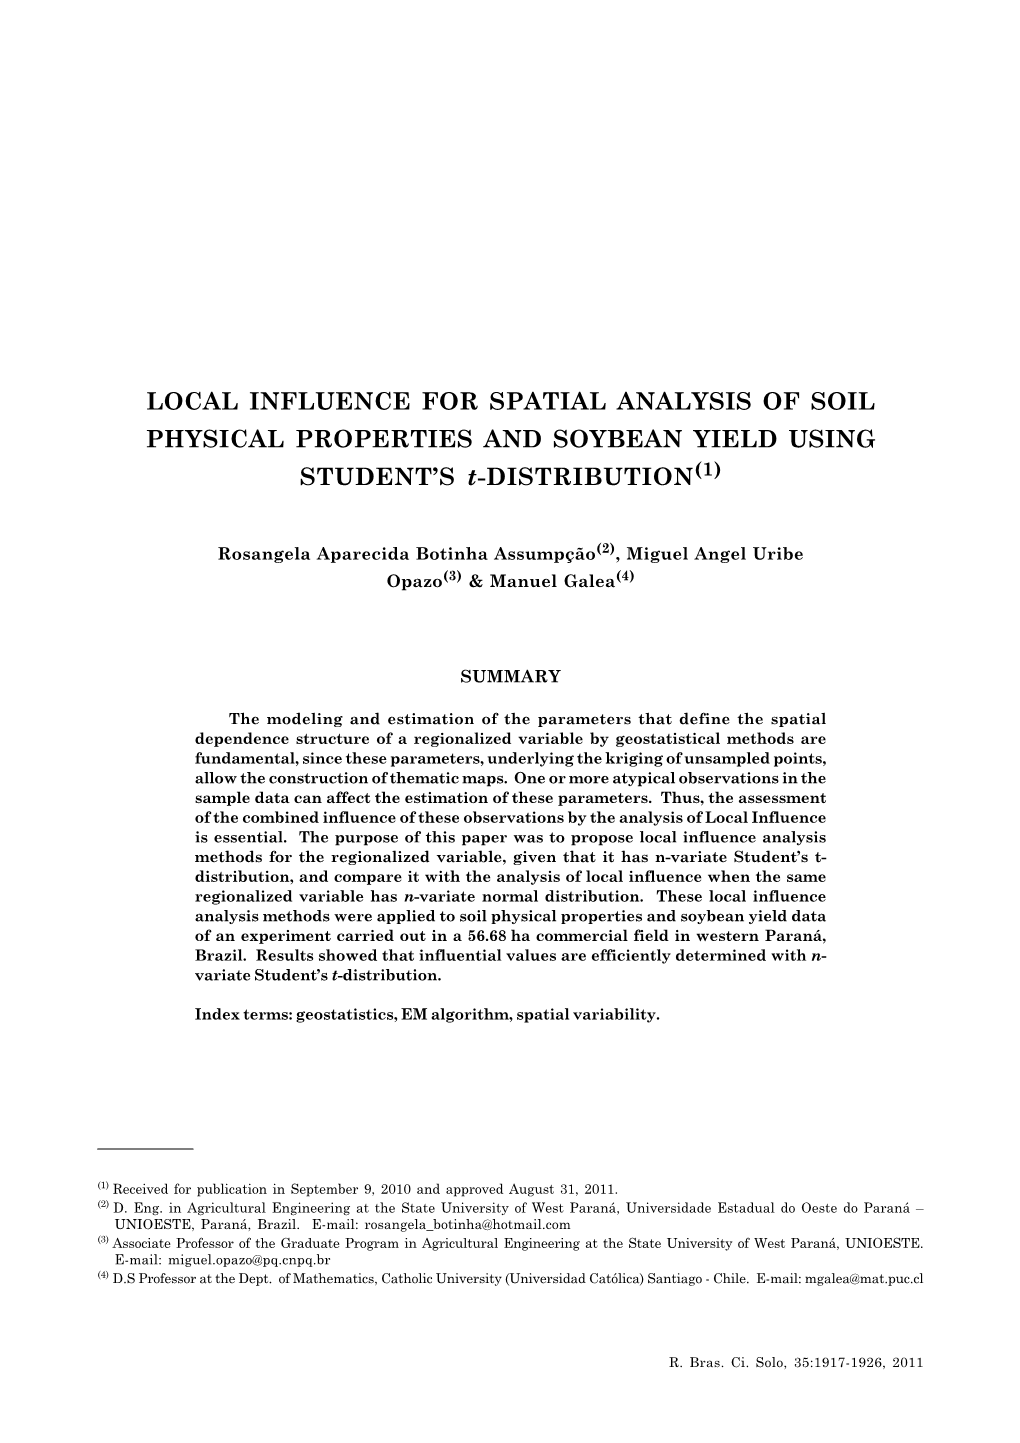 LOCAL INFLUENCE for SPATIAL ANALYSIS of SOIL PHYSICAL PROPERTIES and SOYBEAN YIELD USING STUDENT's T-DISTRIBUTION